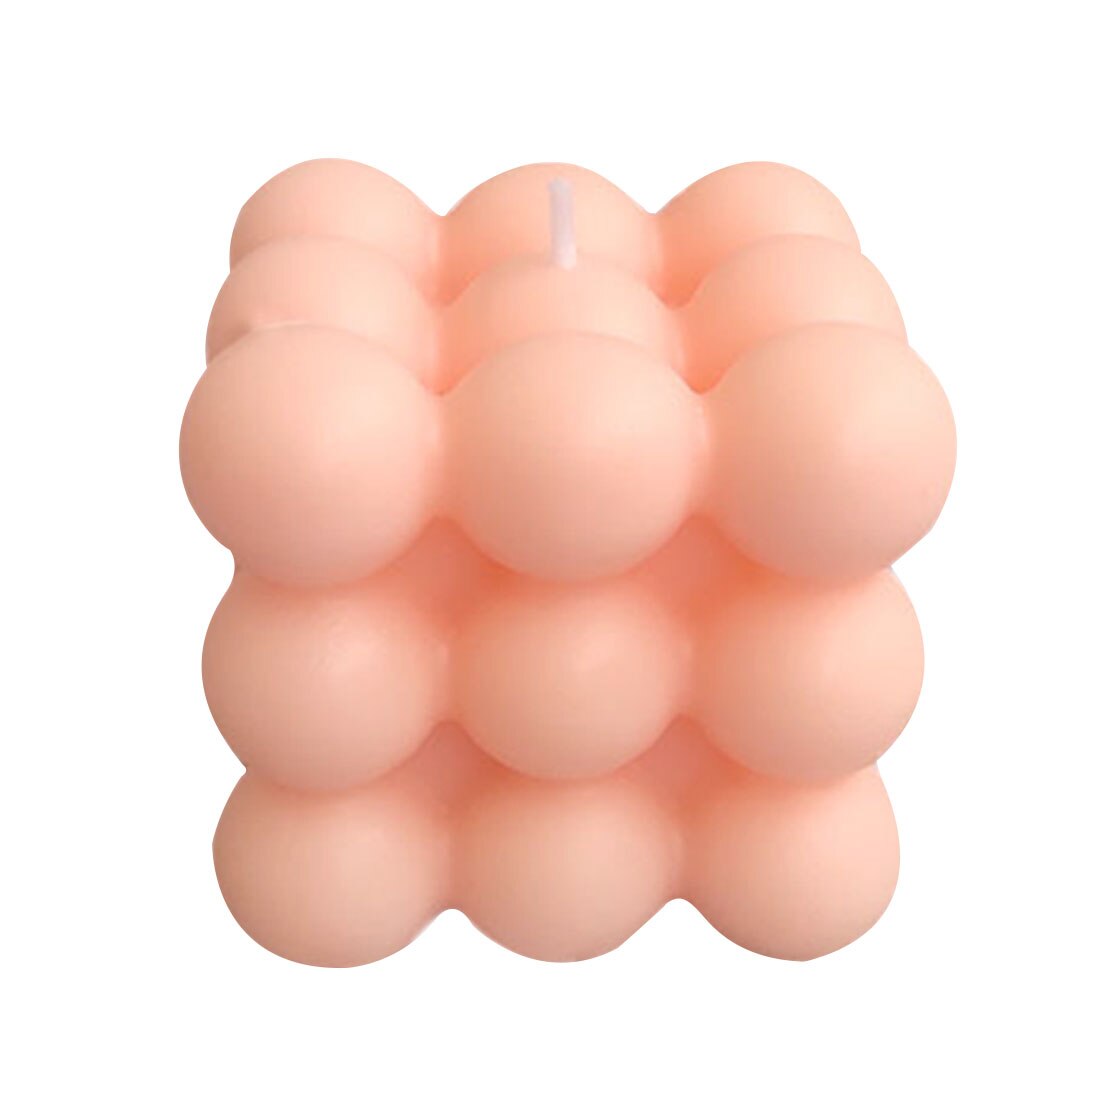 2.1Inch Round Magic Cube Candle scented relaxing Birthday 1PC Soy Wax Aromatherapy Candles Home Party Decoration: Pink cube